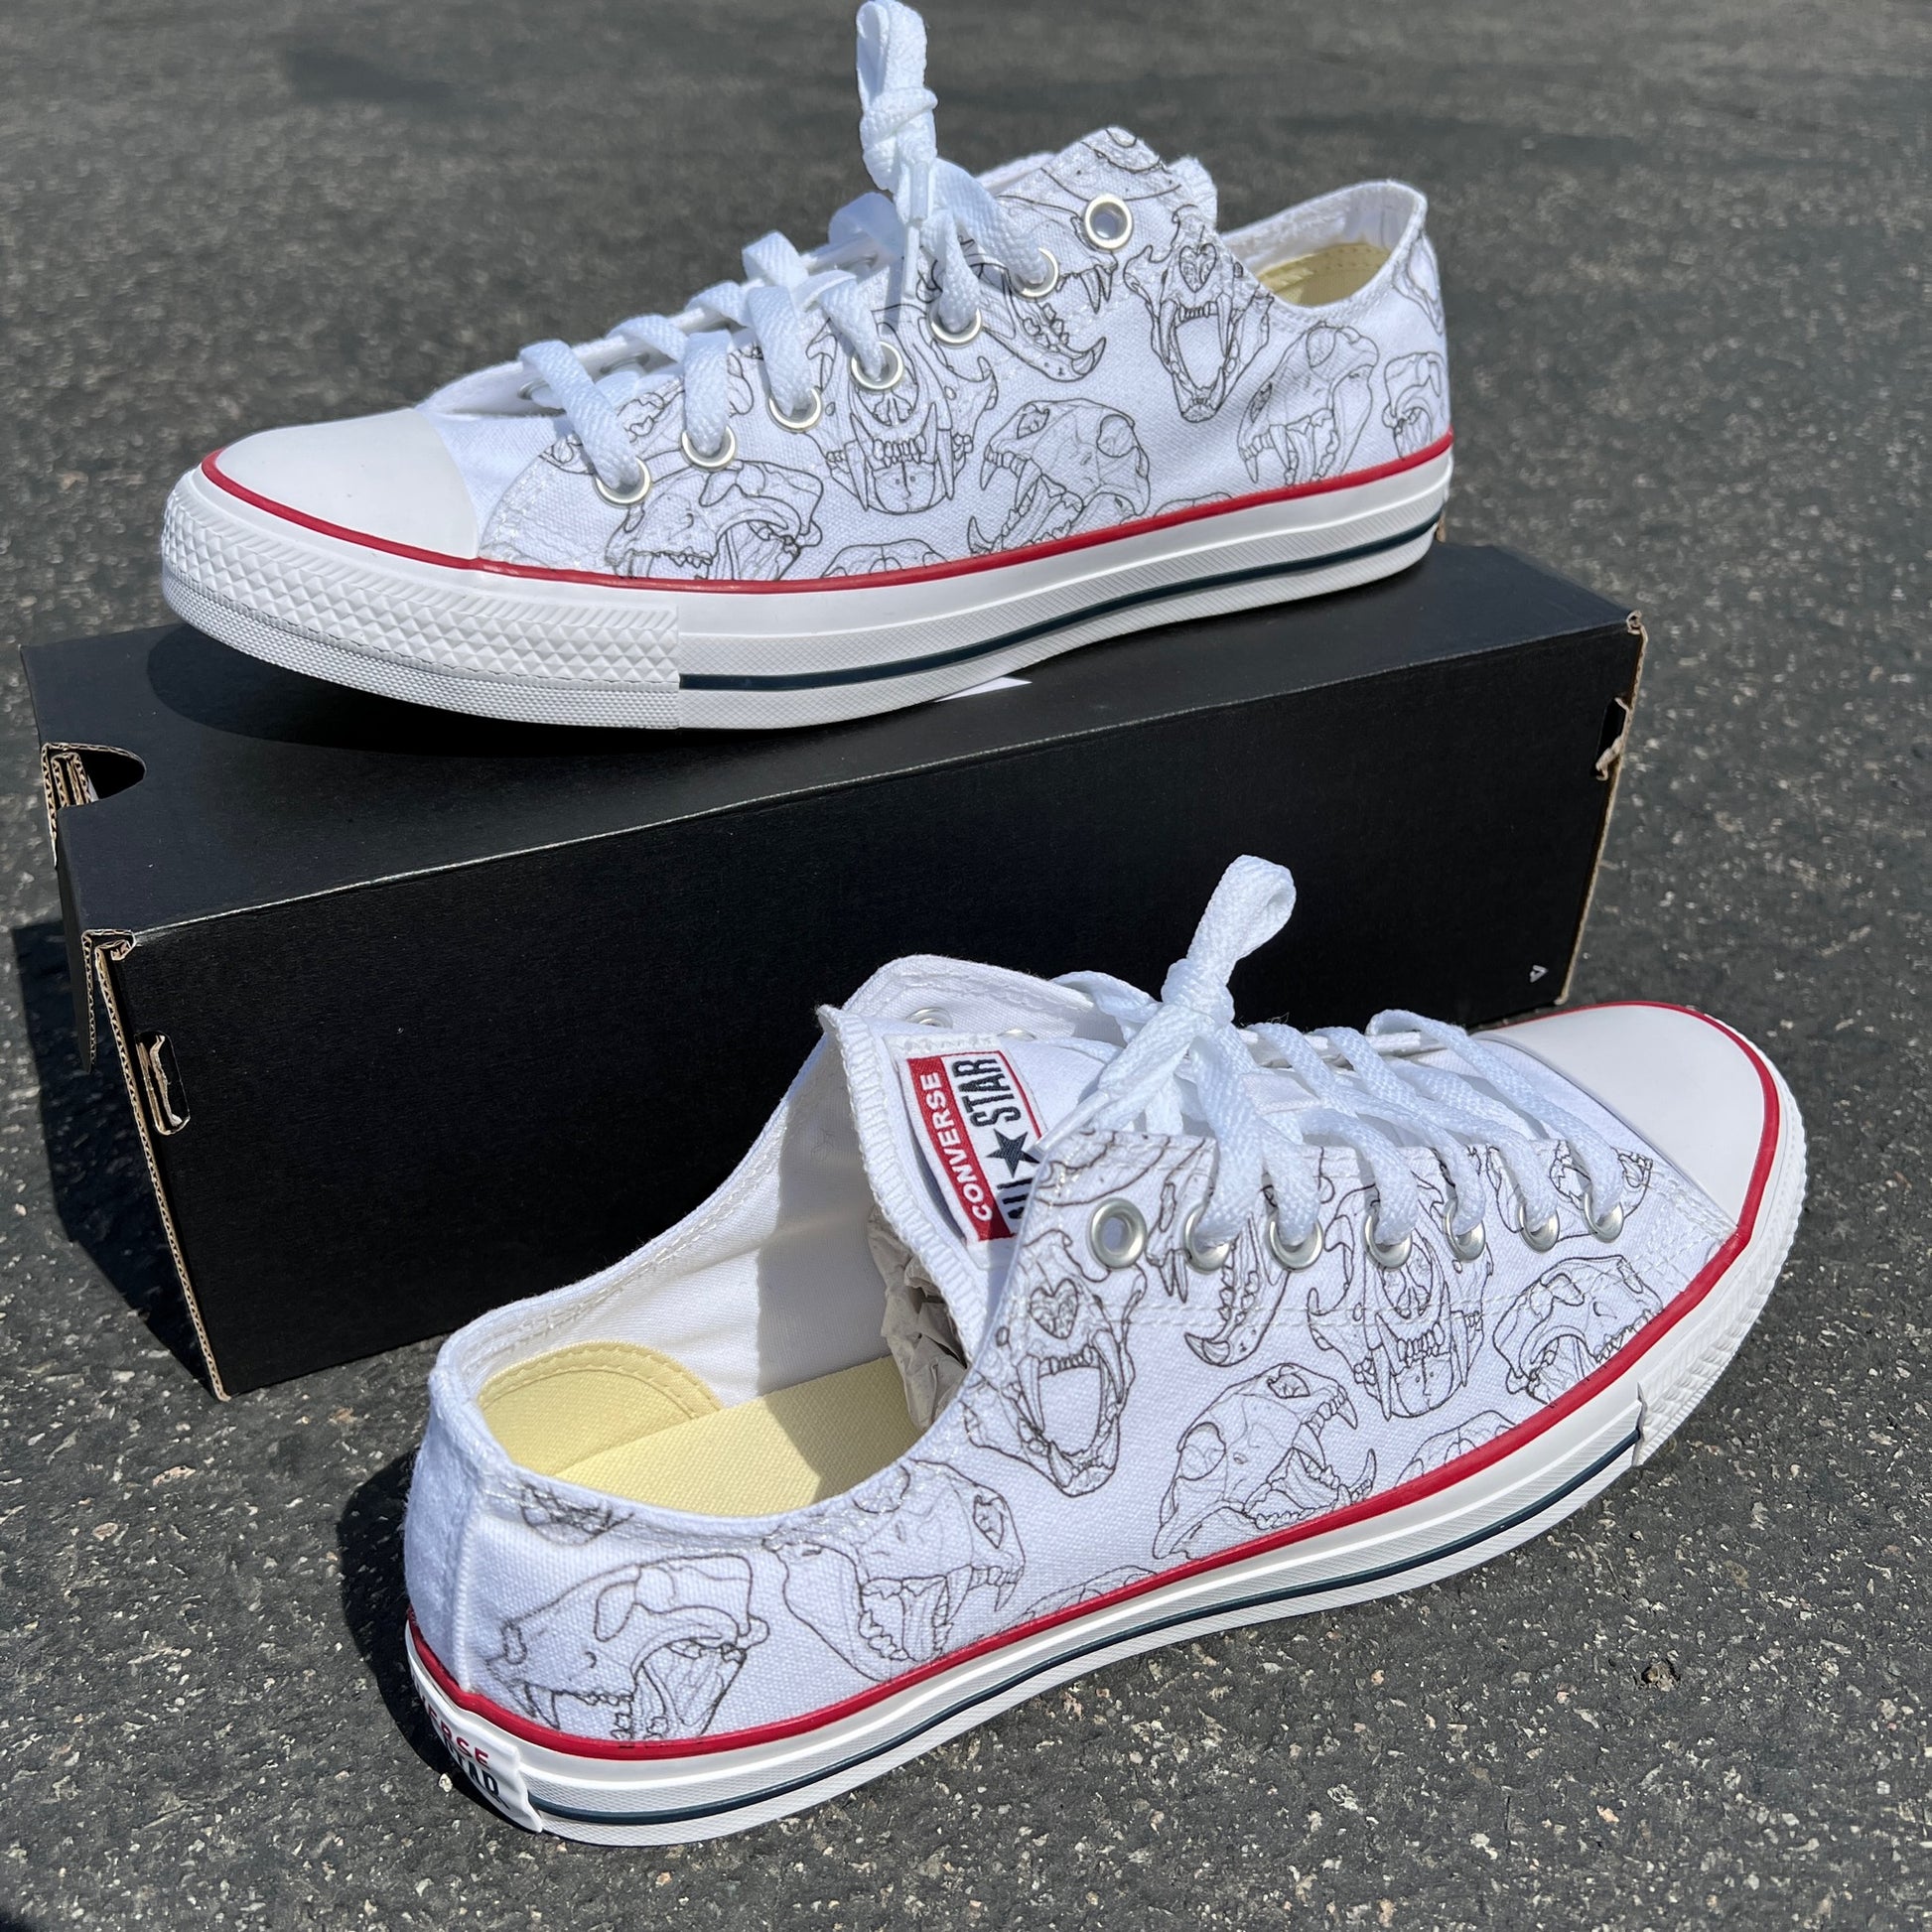 Animal Skull White Low Top Converse - Custom Converse Shoes